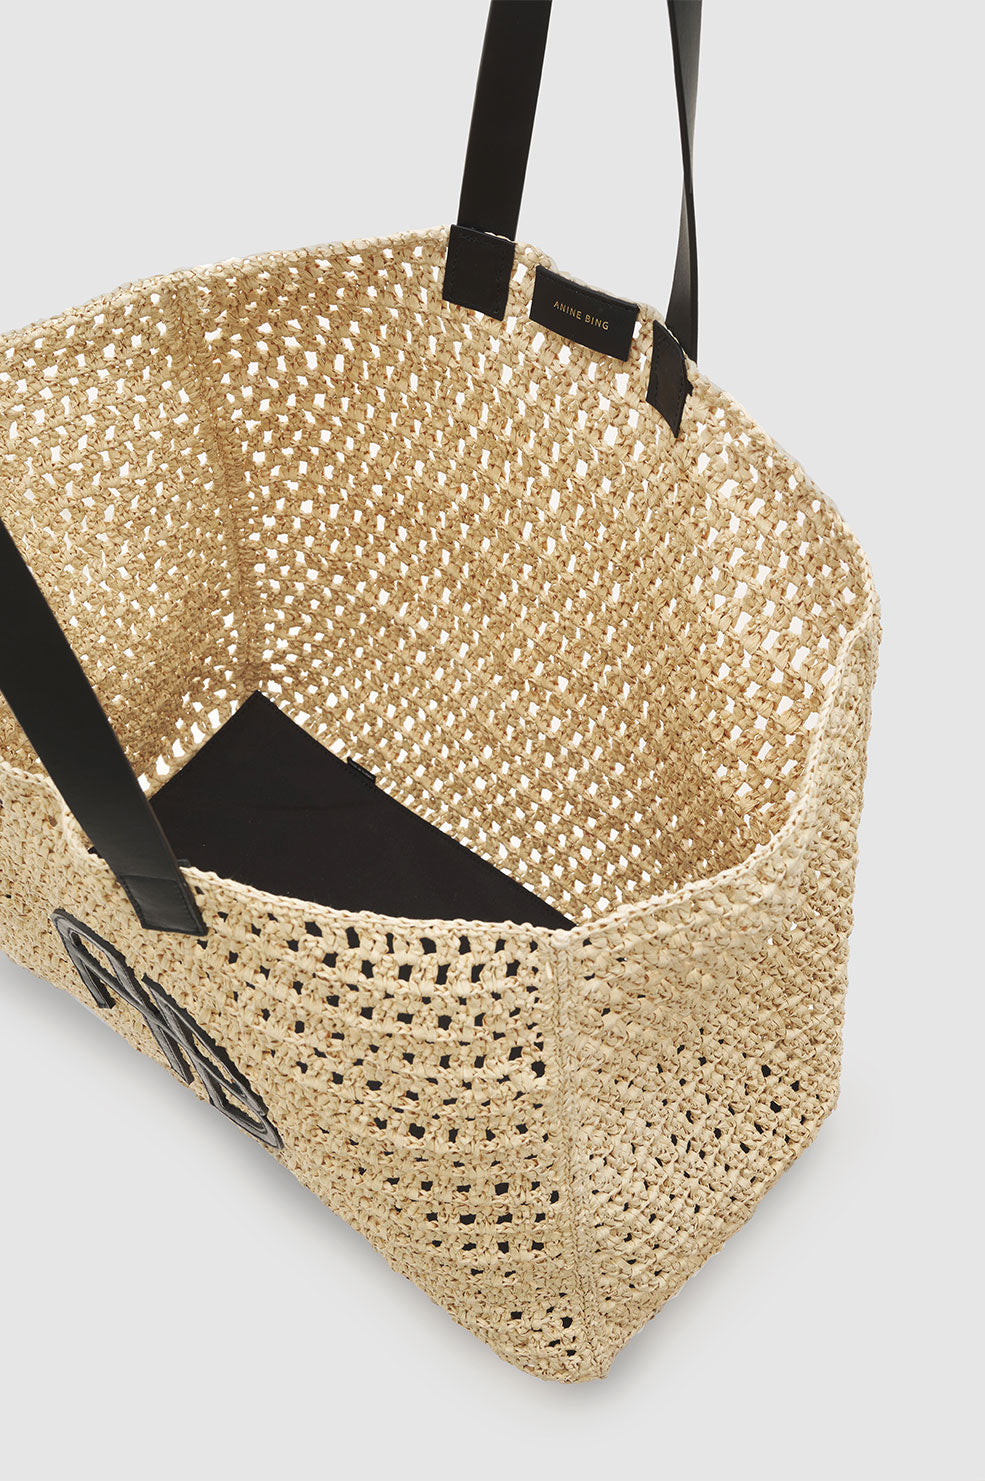 Buy Brown Basket Weave Bag by Handle Those Bags Online at Aza Fashions.